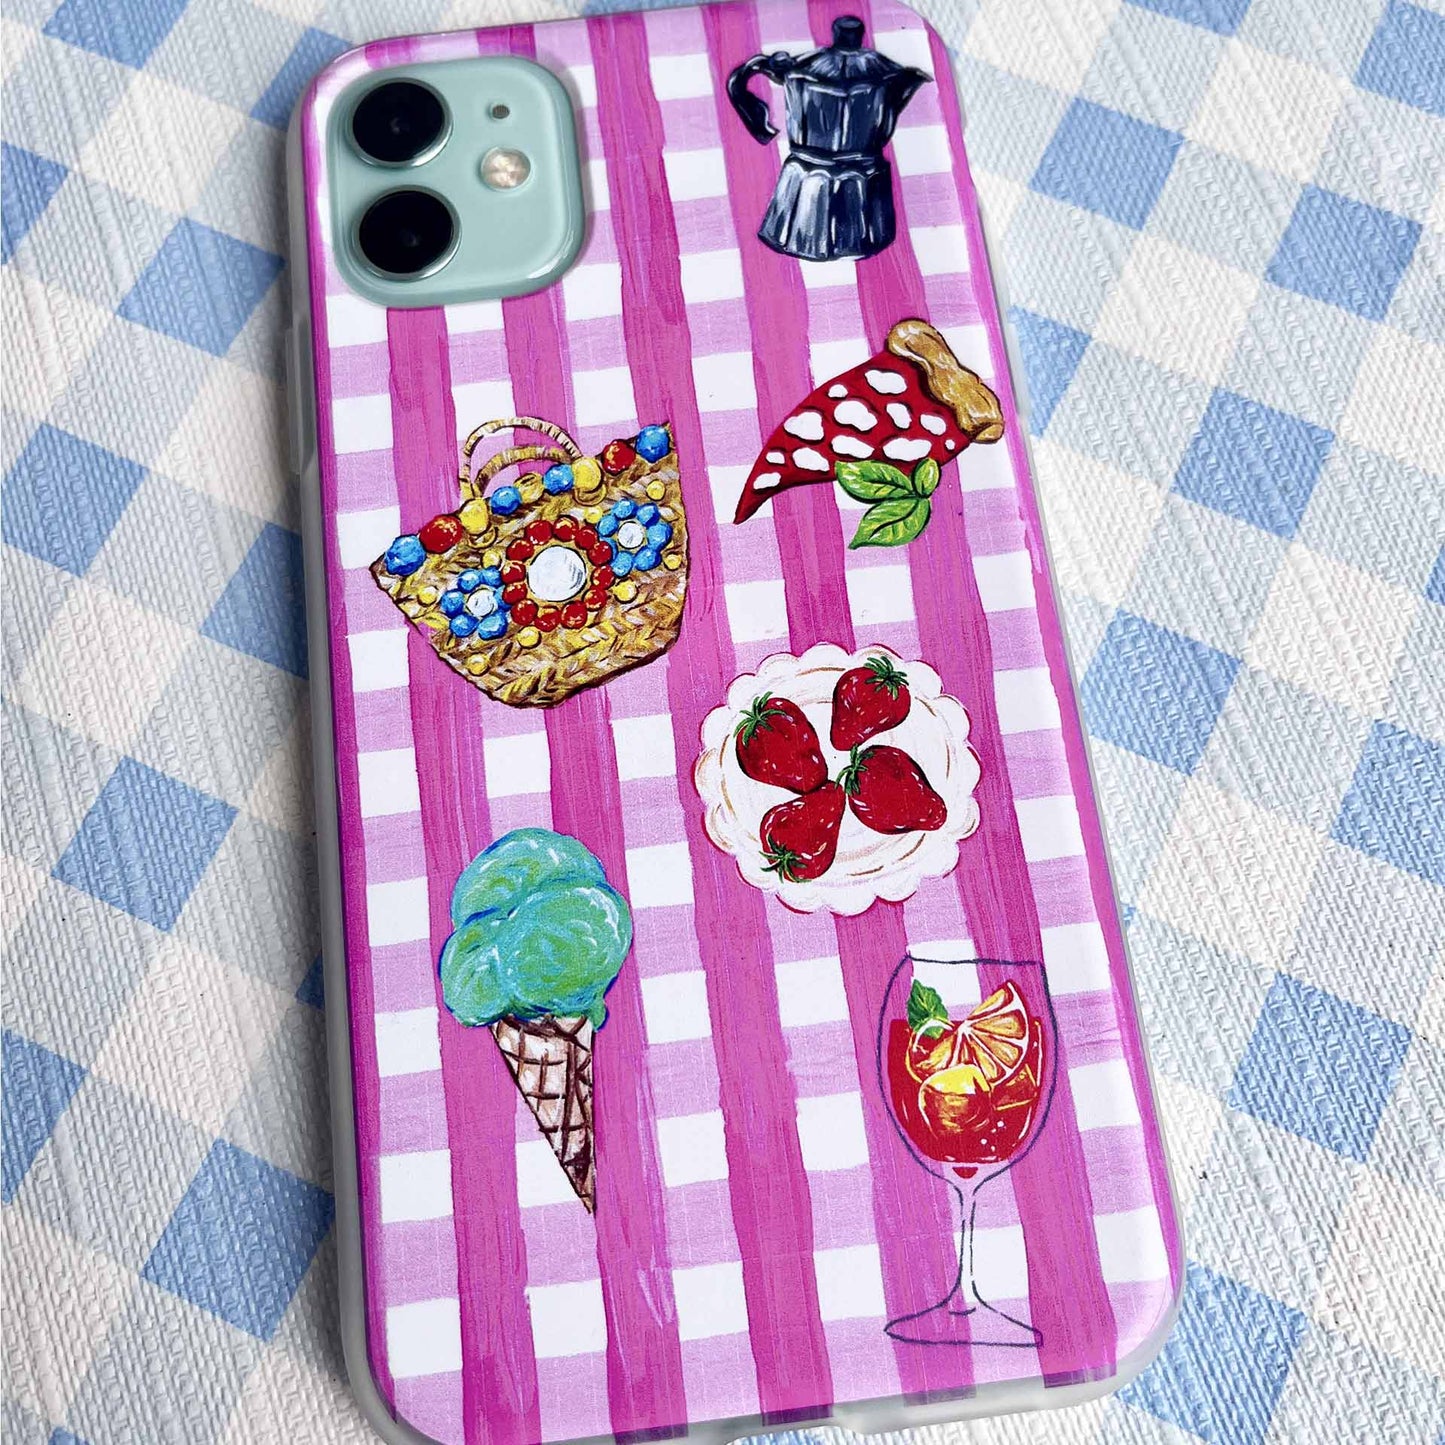 Pink Gingham Vichy Phone Cover featuring Italian icons on blue tablecloth